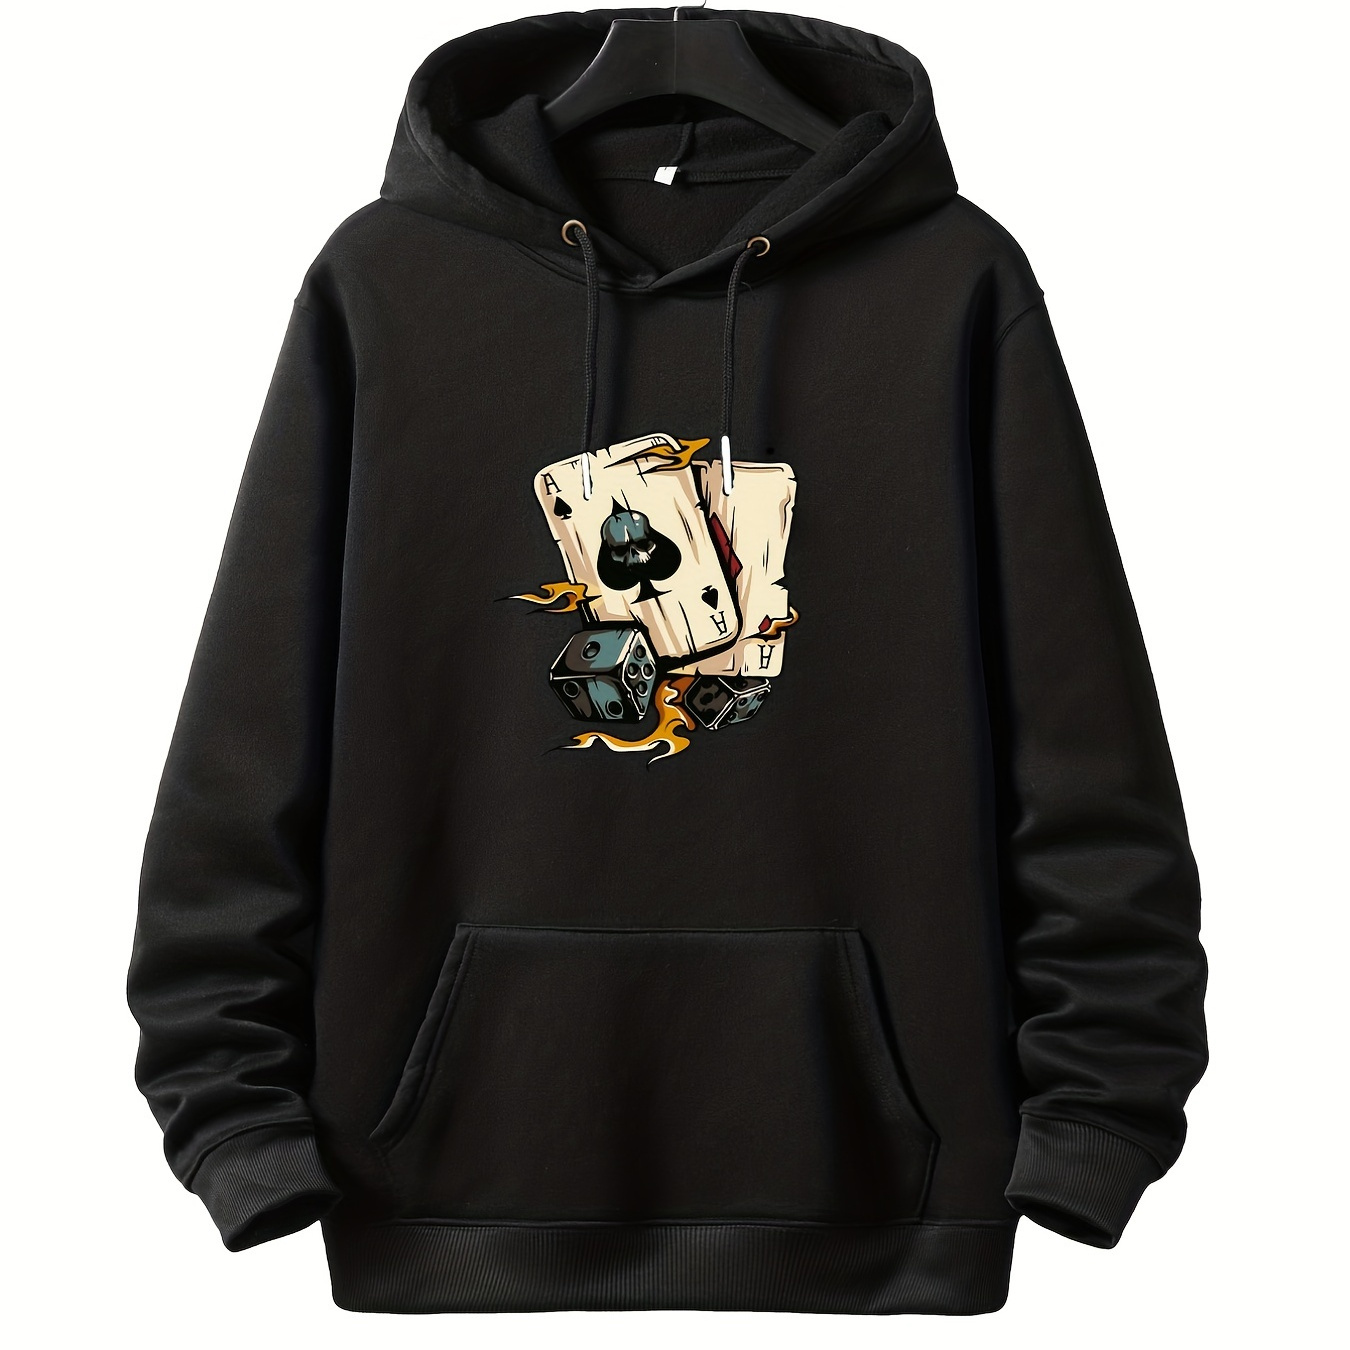 

Plus Size Men's Poker Card And Dice Pullover Drawstring Hoodie, Oversized Loose Clothing For Big And Tall Guys